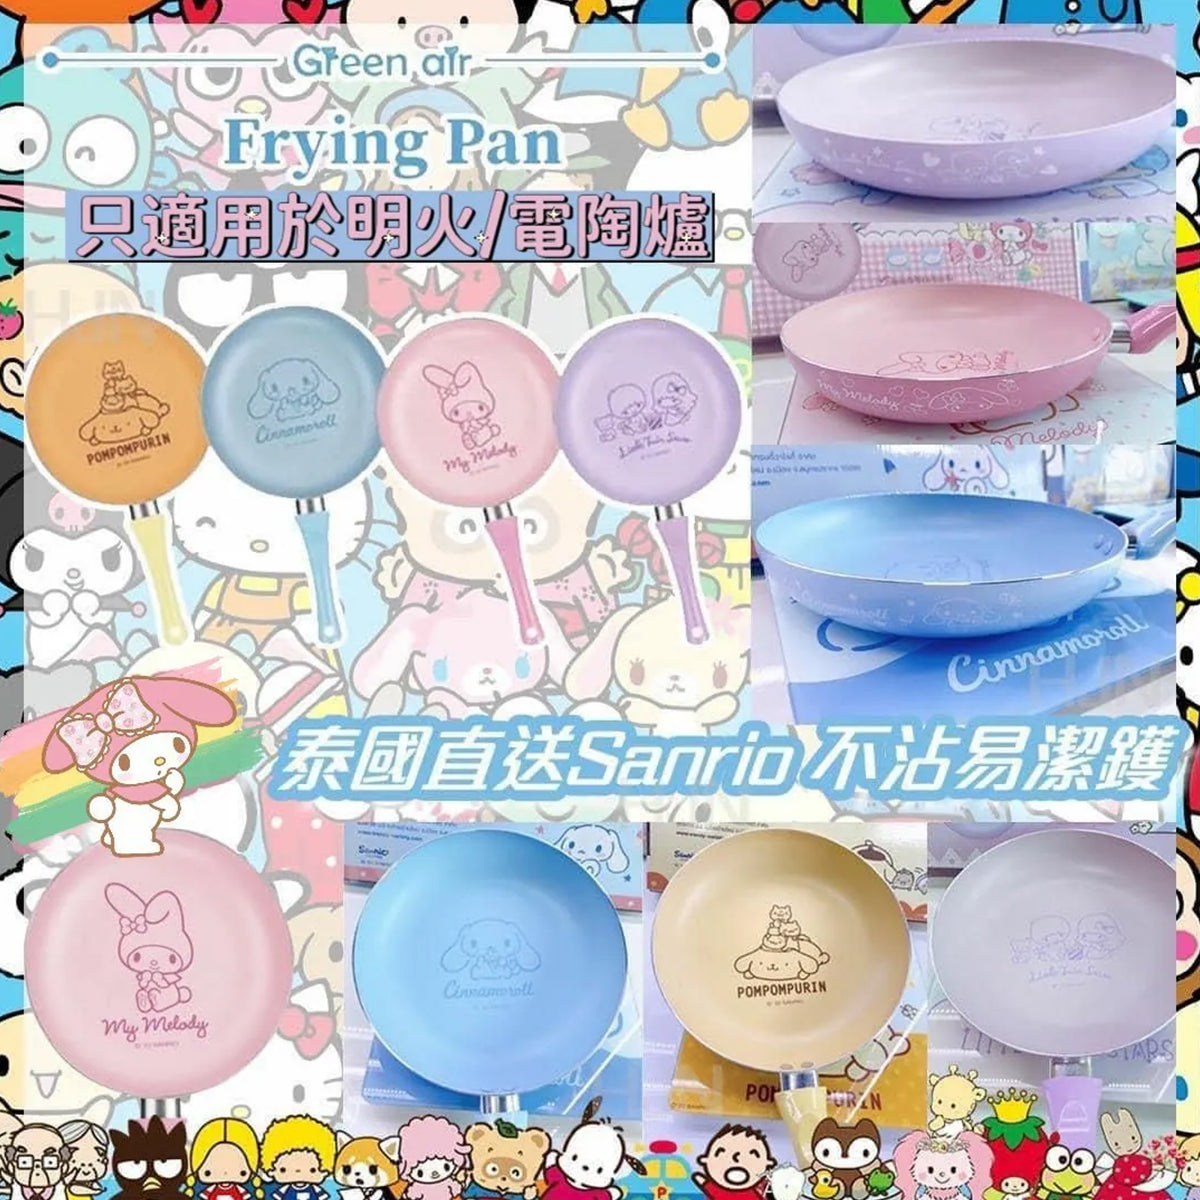 Pan - Sanrio Characters Candy Color